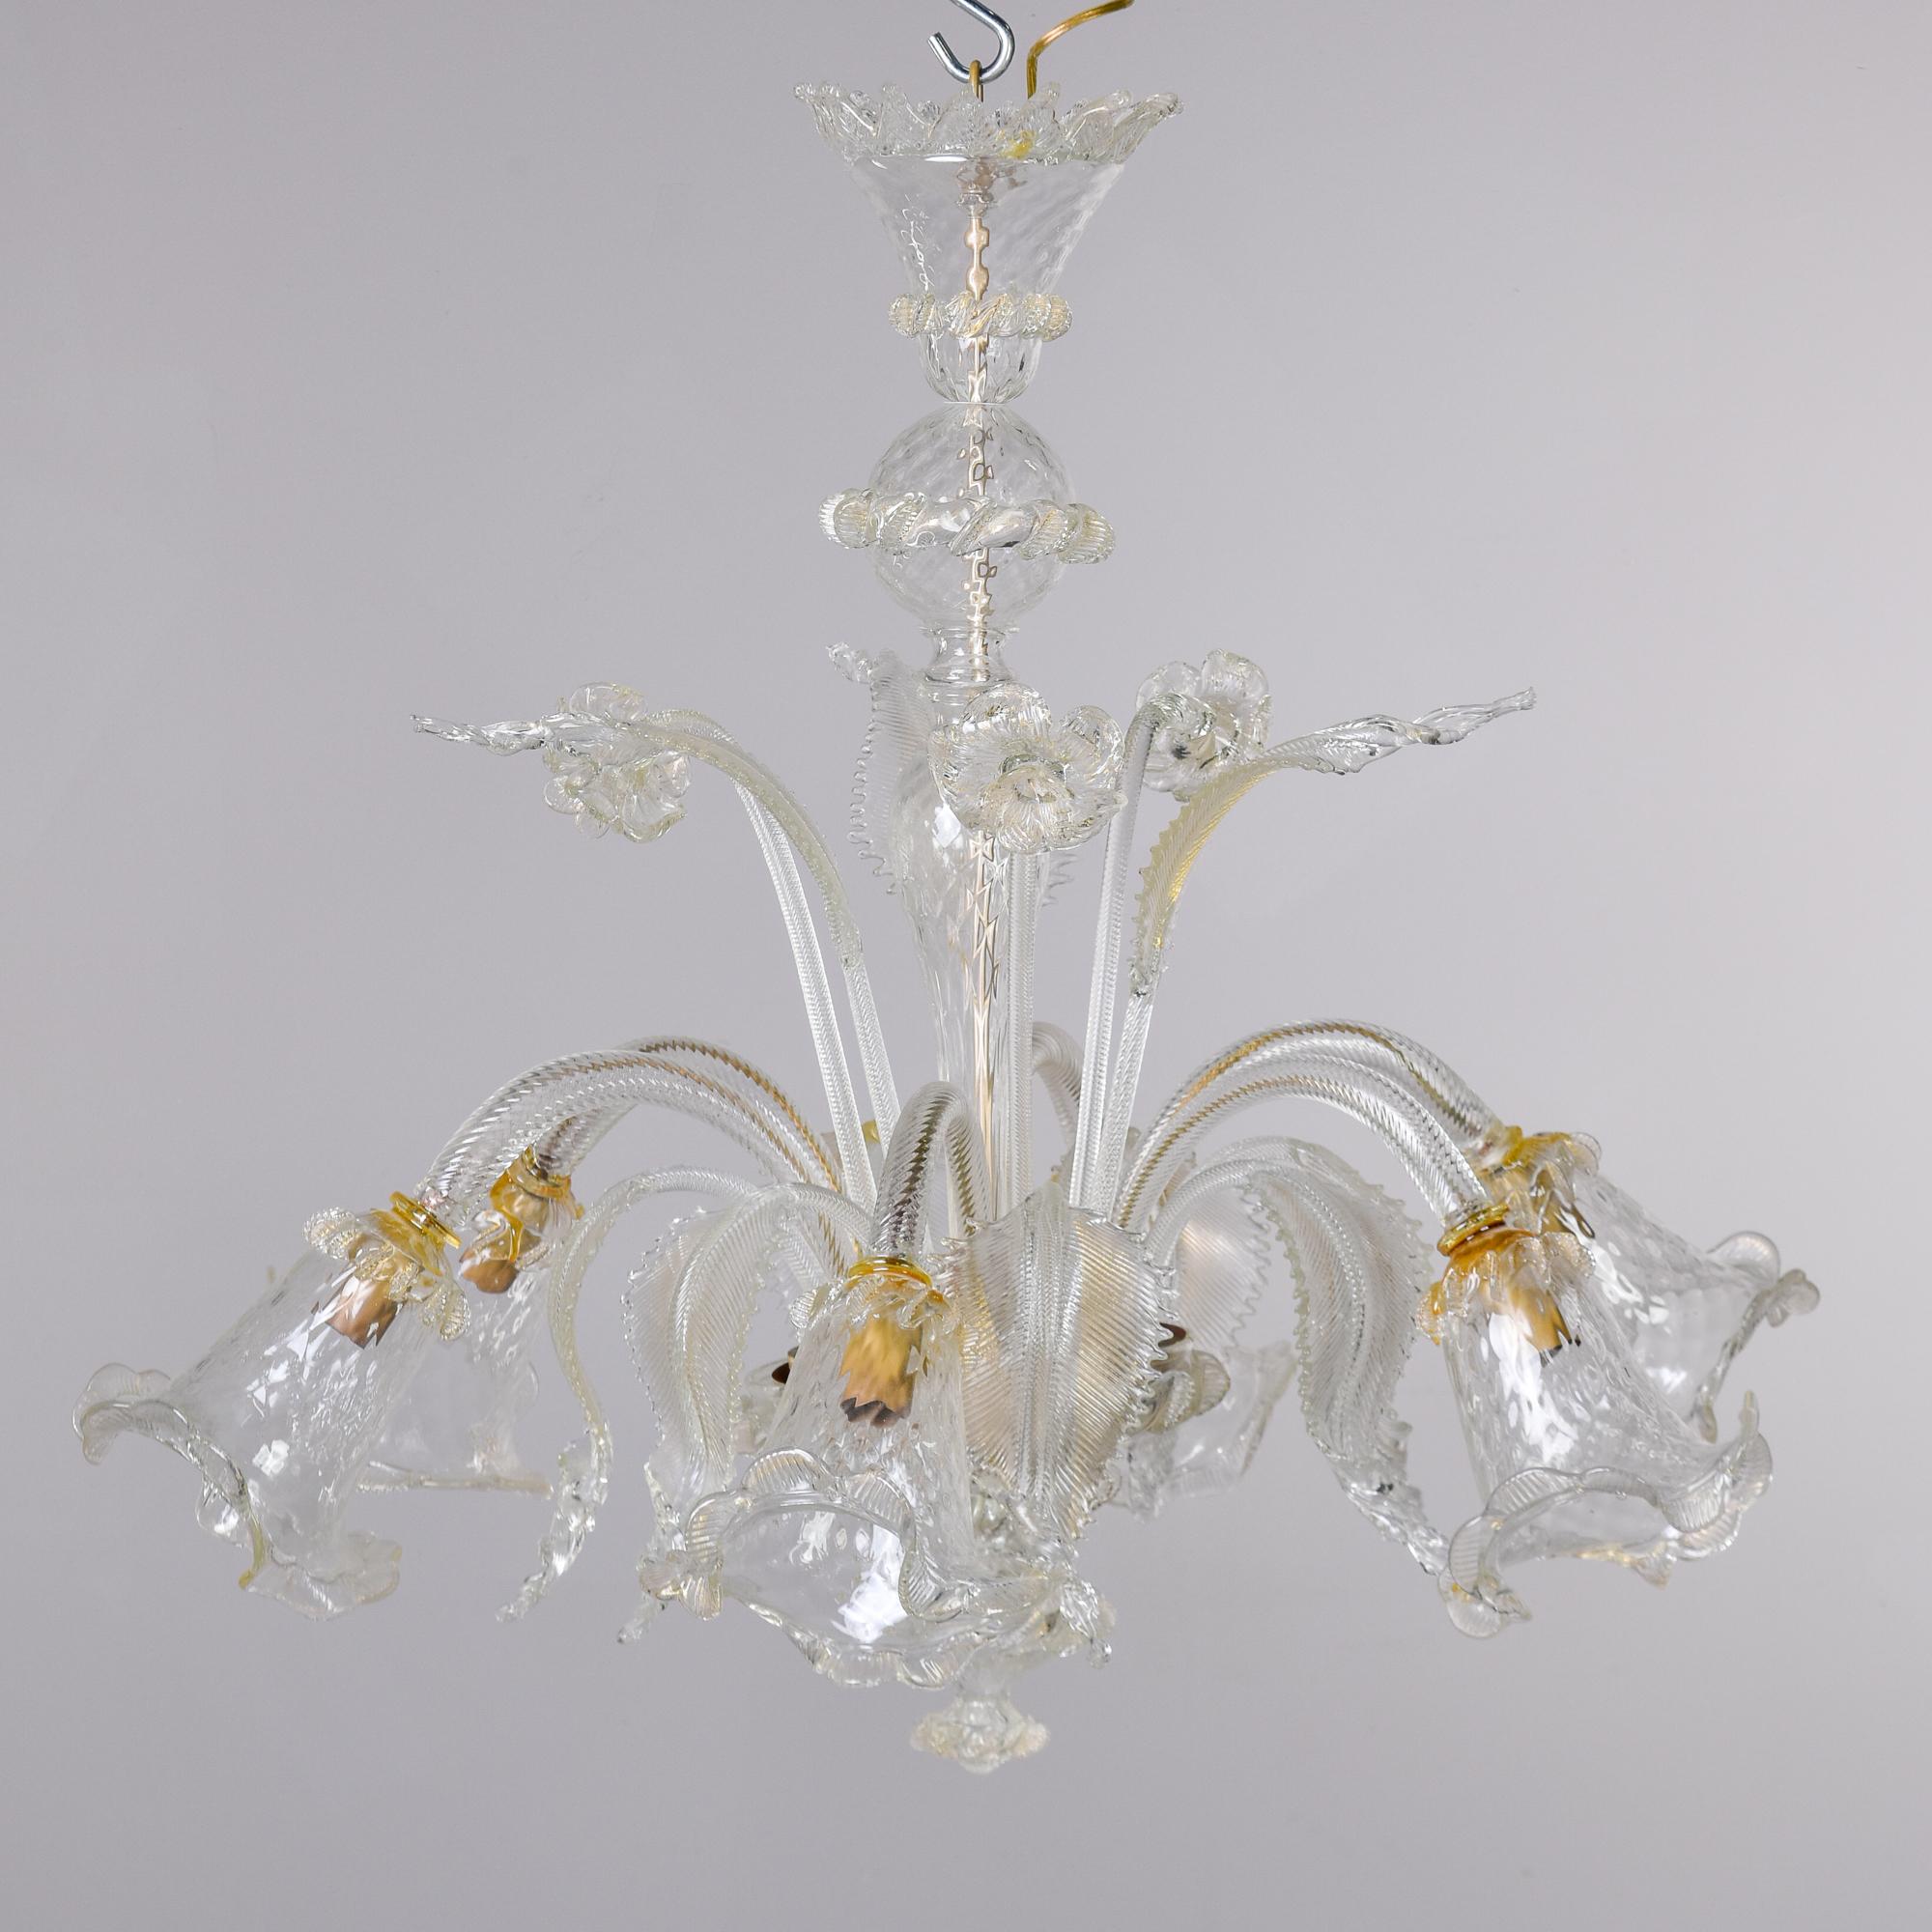 Circa 1980s Murano chandelier in clear glass with gold inclusions. This fixture has six arms with standard-sized sockets that have been rewired for US electrical standards. Upper portion of fixture has mouth blown glass curled leaves, daffodils.